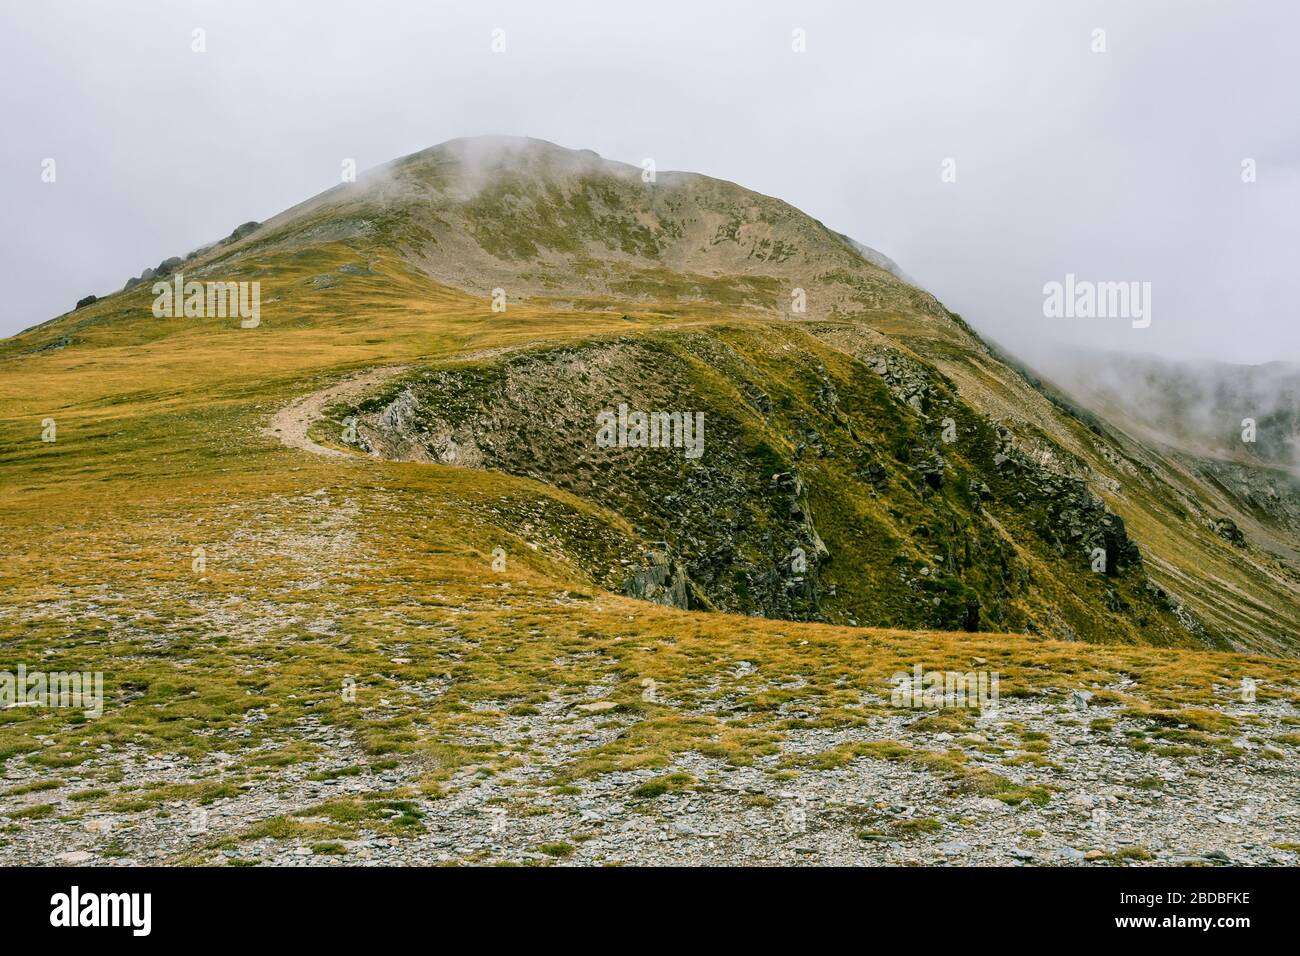 View of the Bastiments Peak, in the Pyrenees Mountains, Spain. Stock Photo